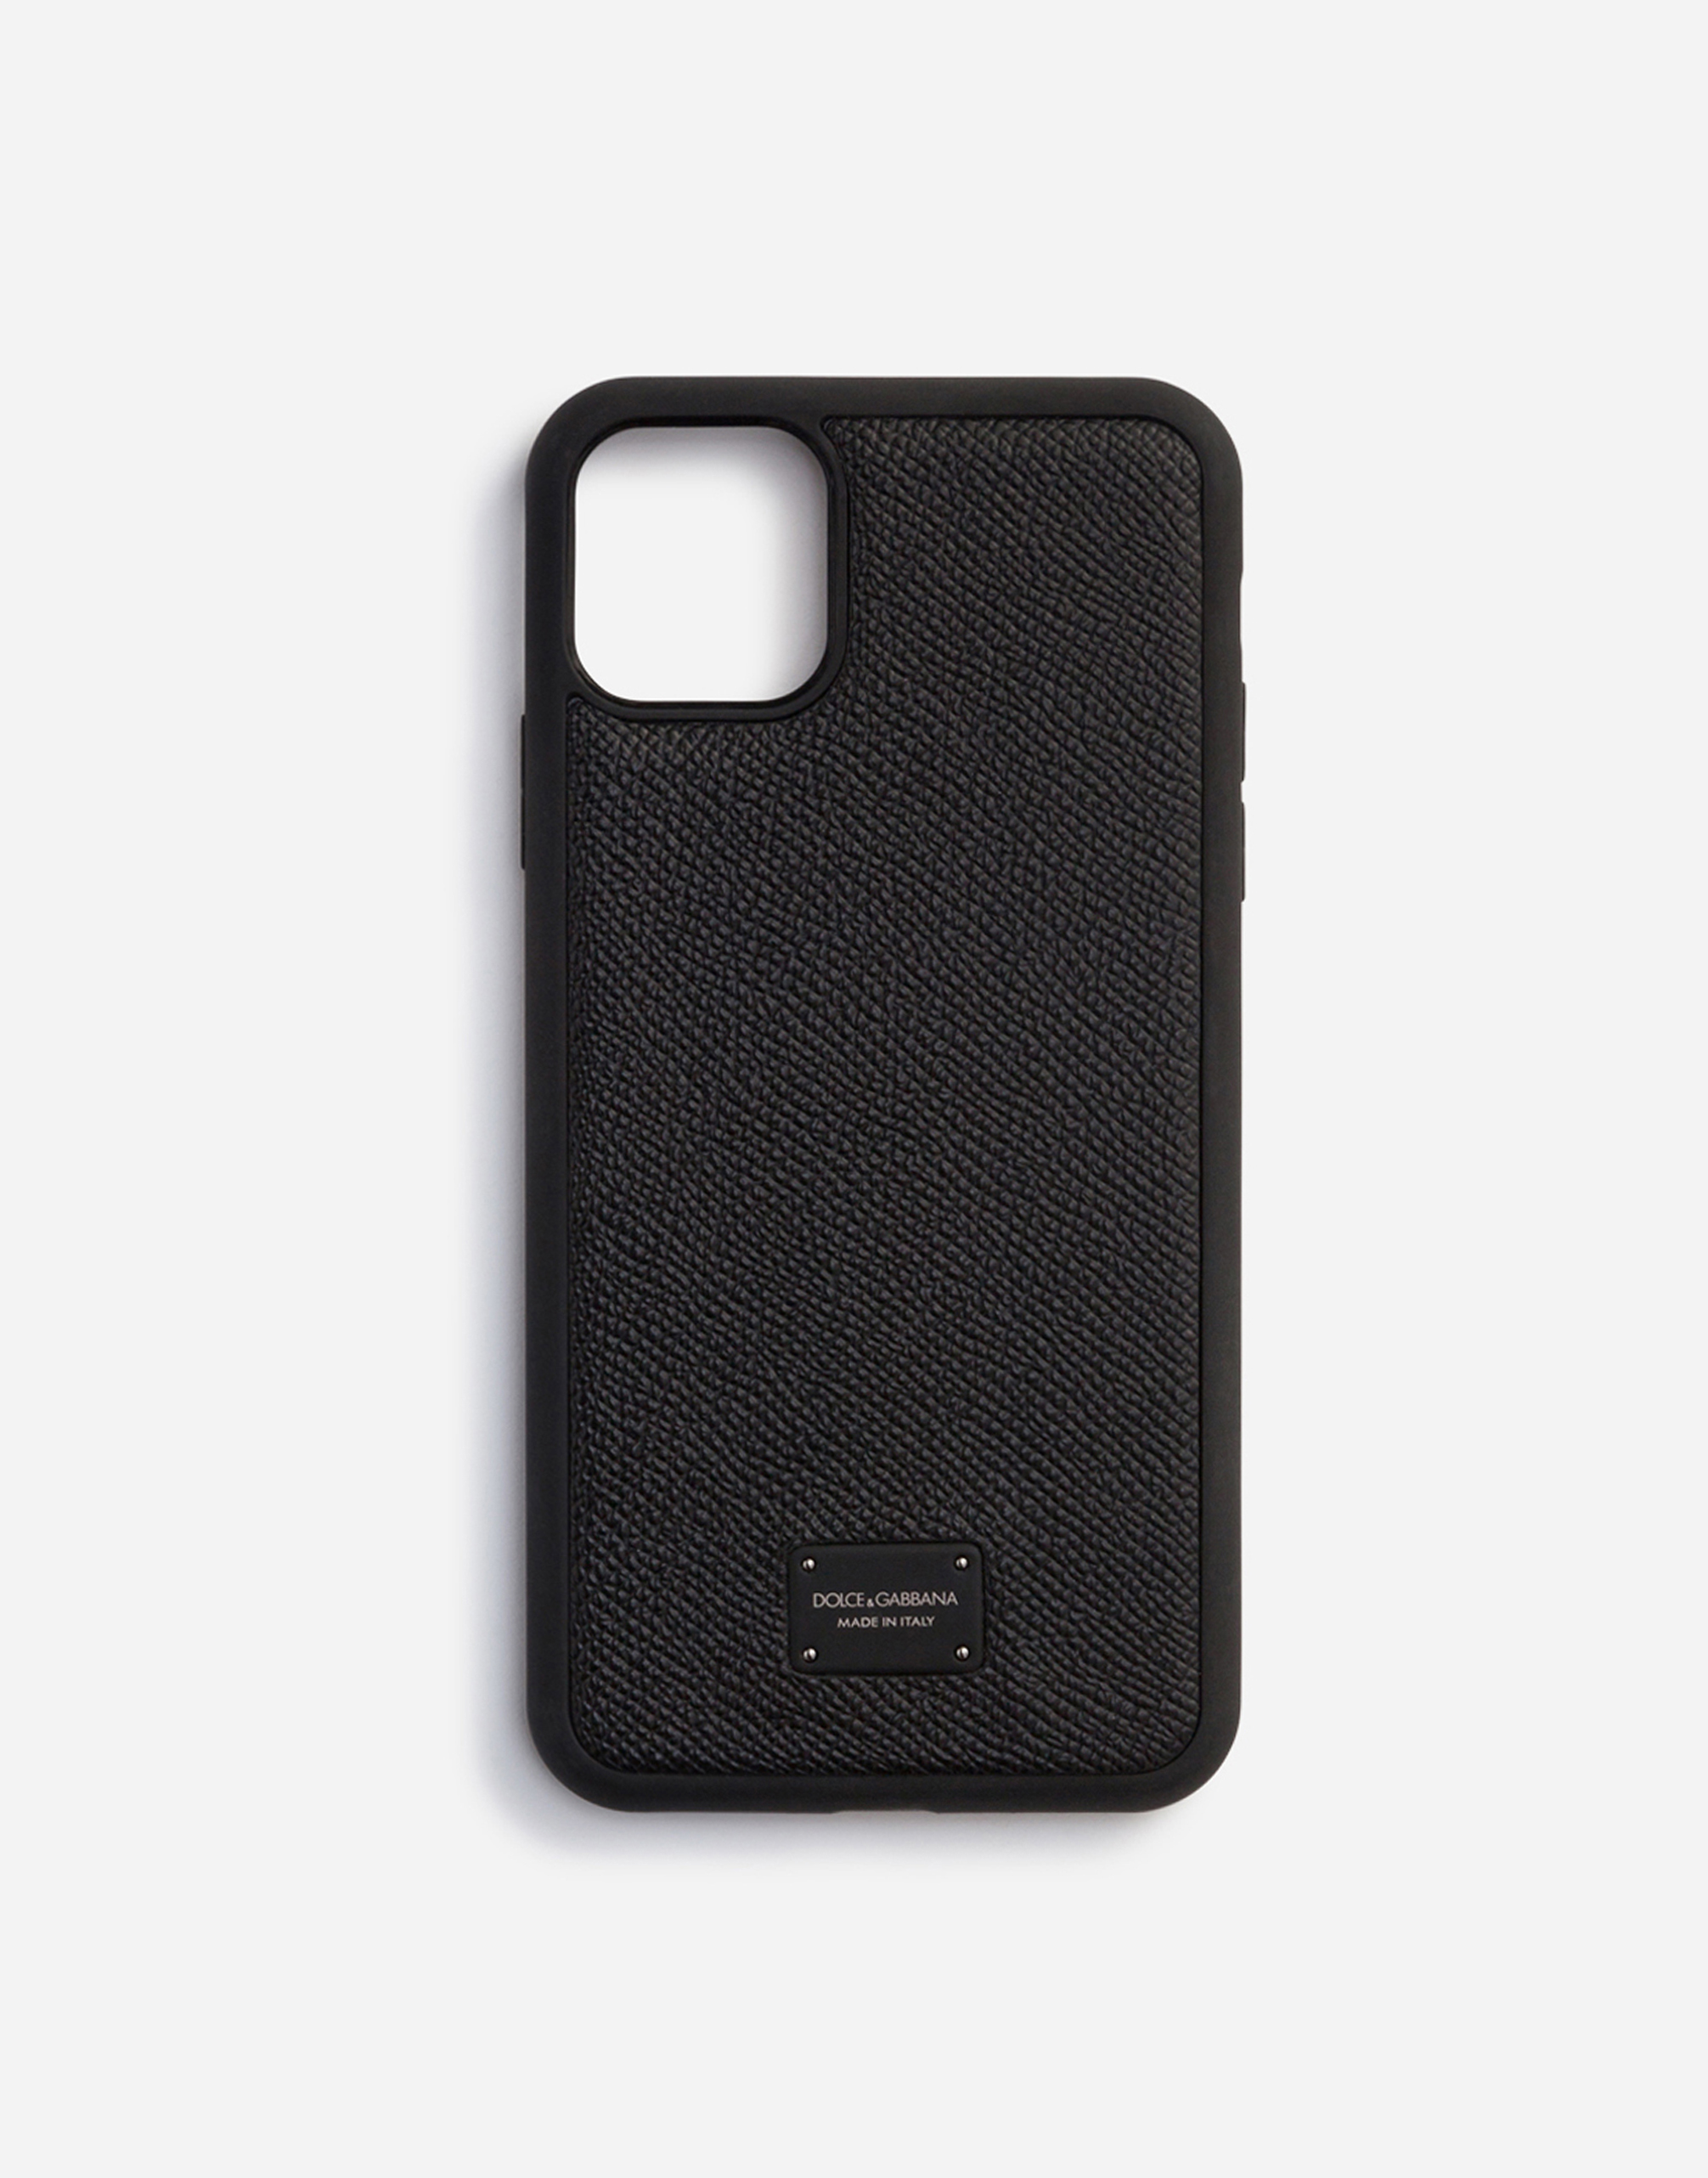 Dauphine calfskin iPhone 11 Pro max cover with branded plate in Black